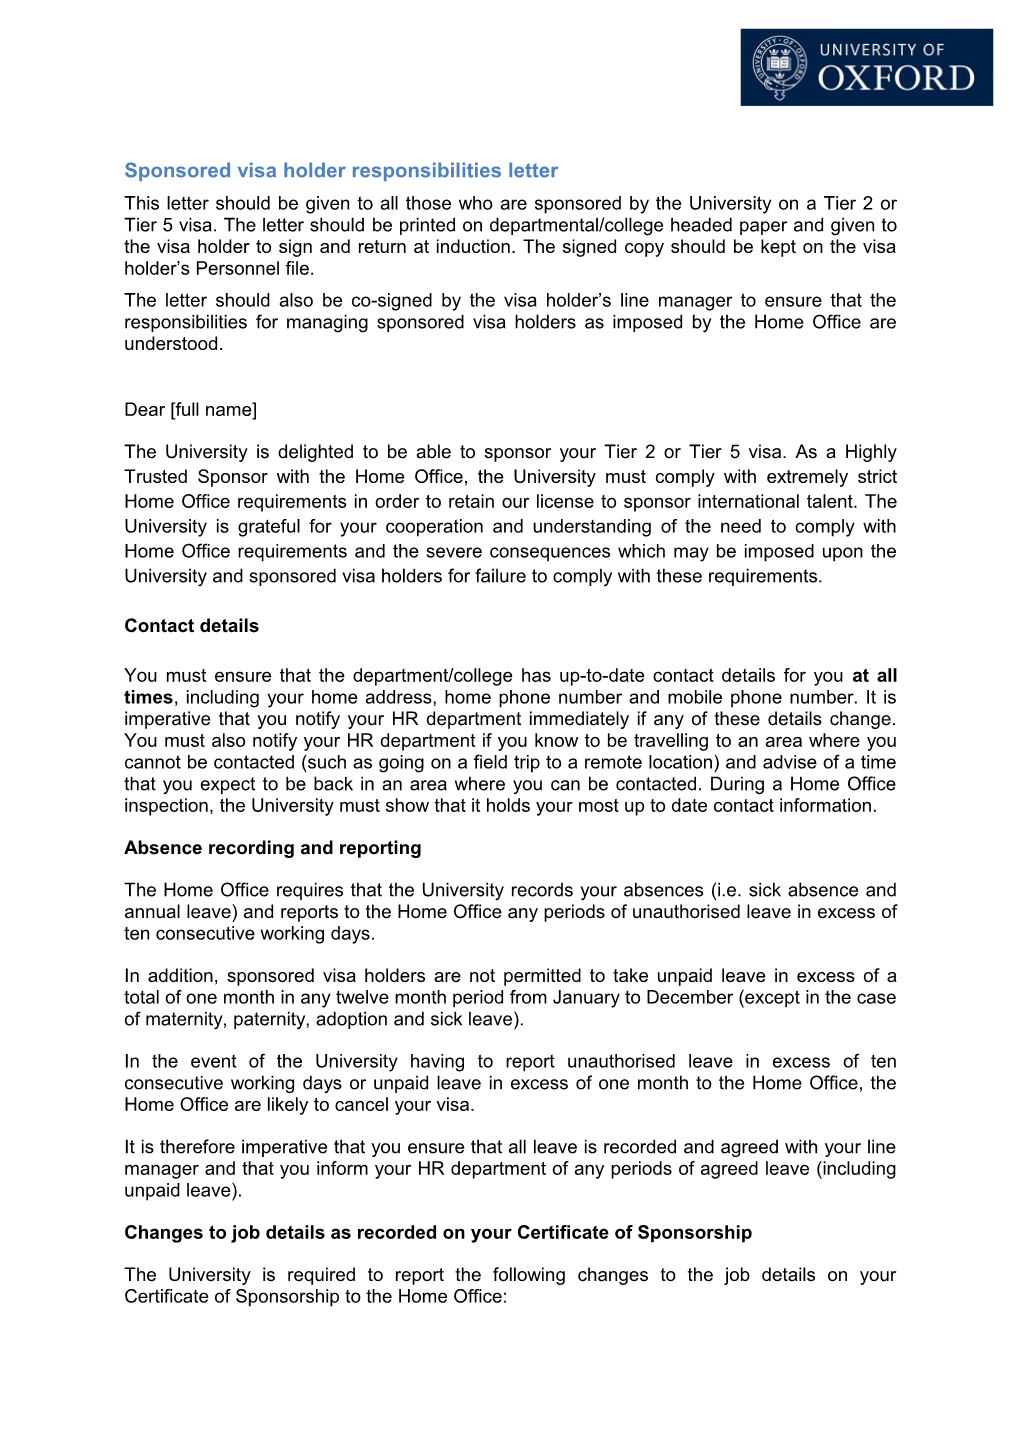 Letter to Give to Migrants Sponsored Under the Points-Based System